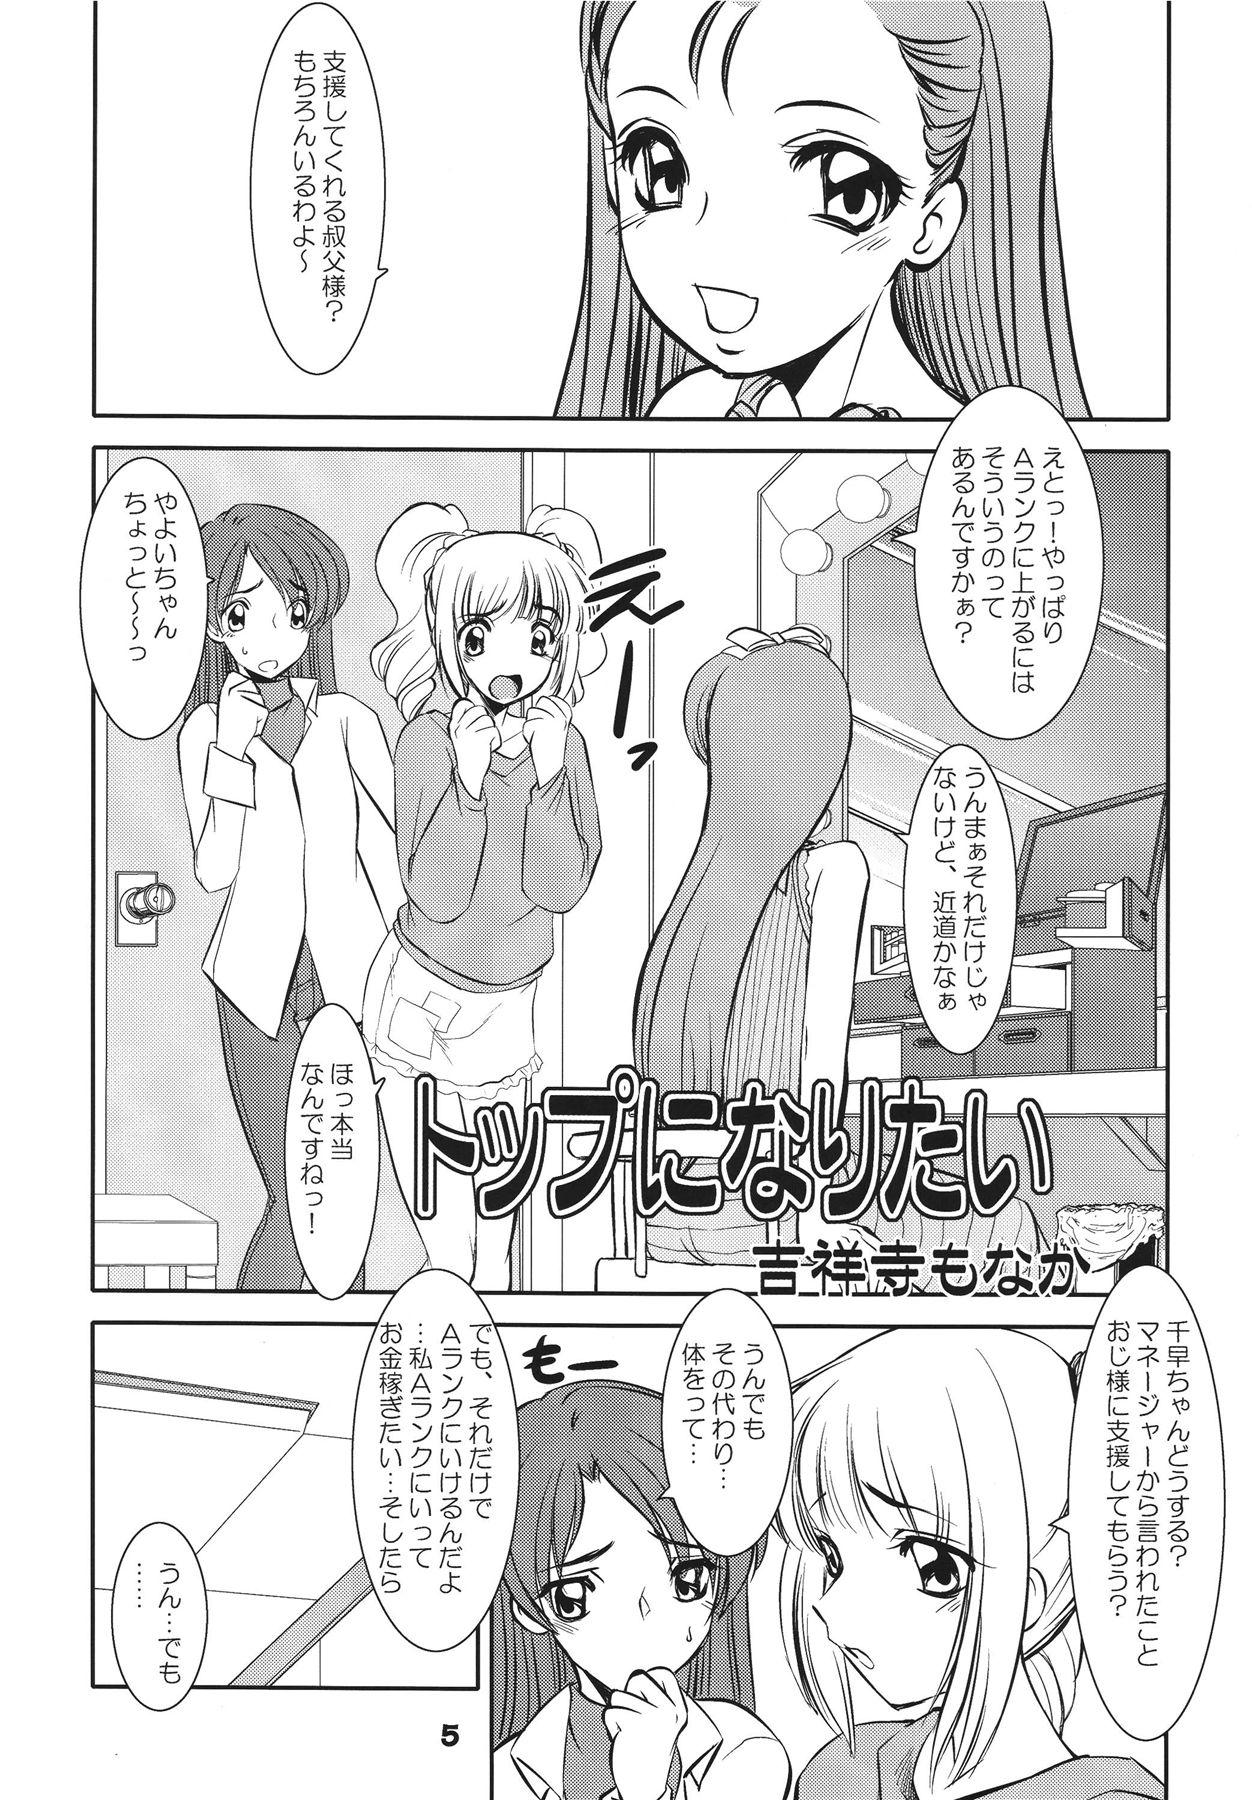 Grandma TOUCH MY HE@RT4 - The idolmaster Assfucked - Page 5